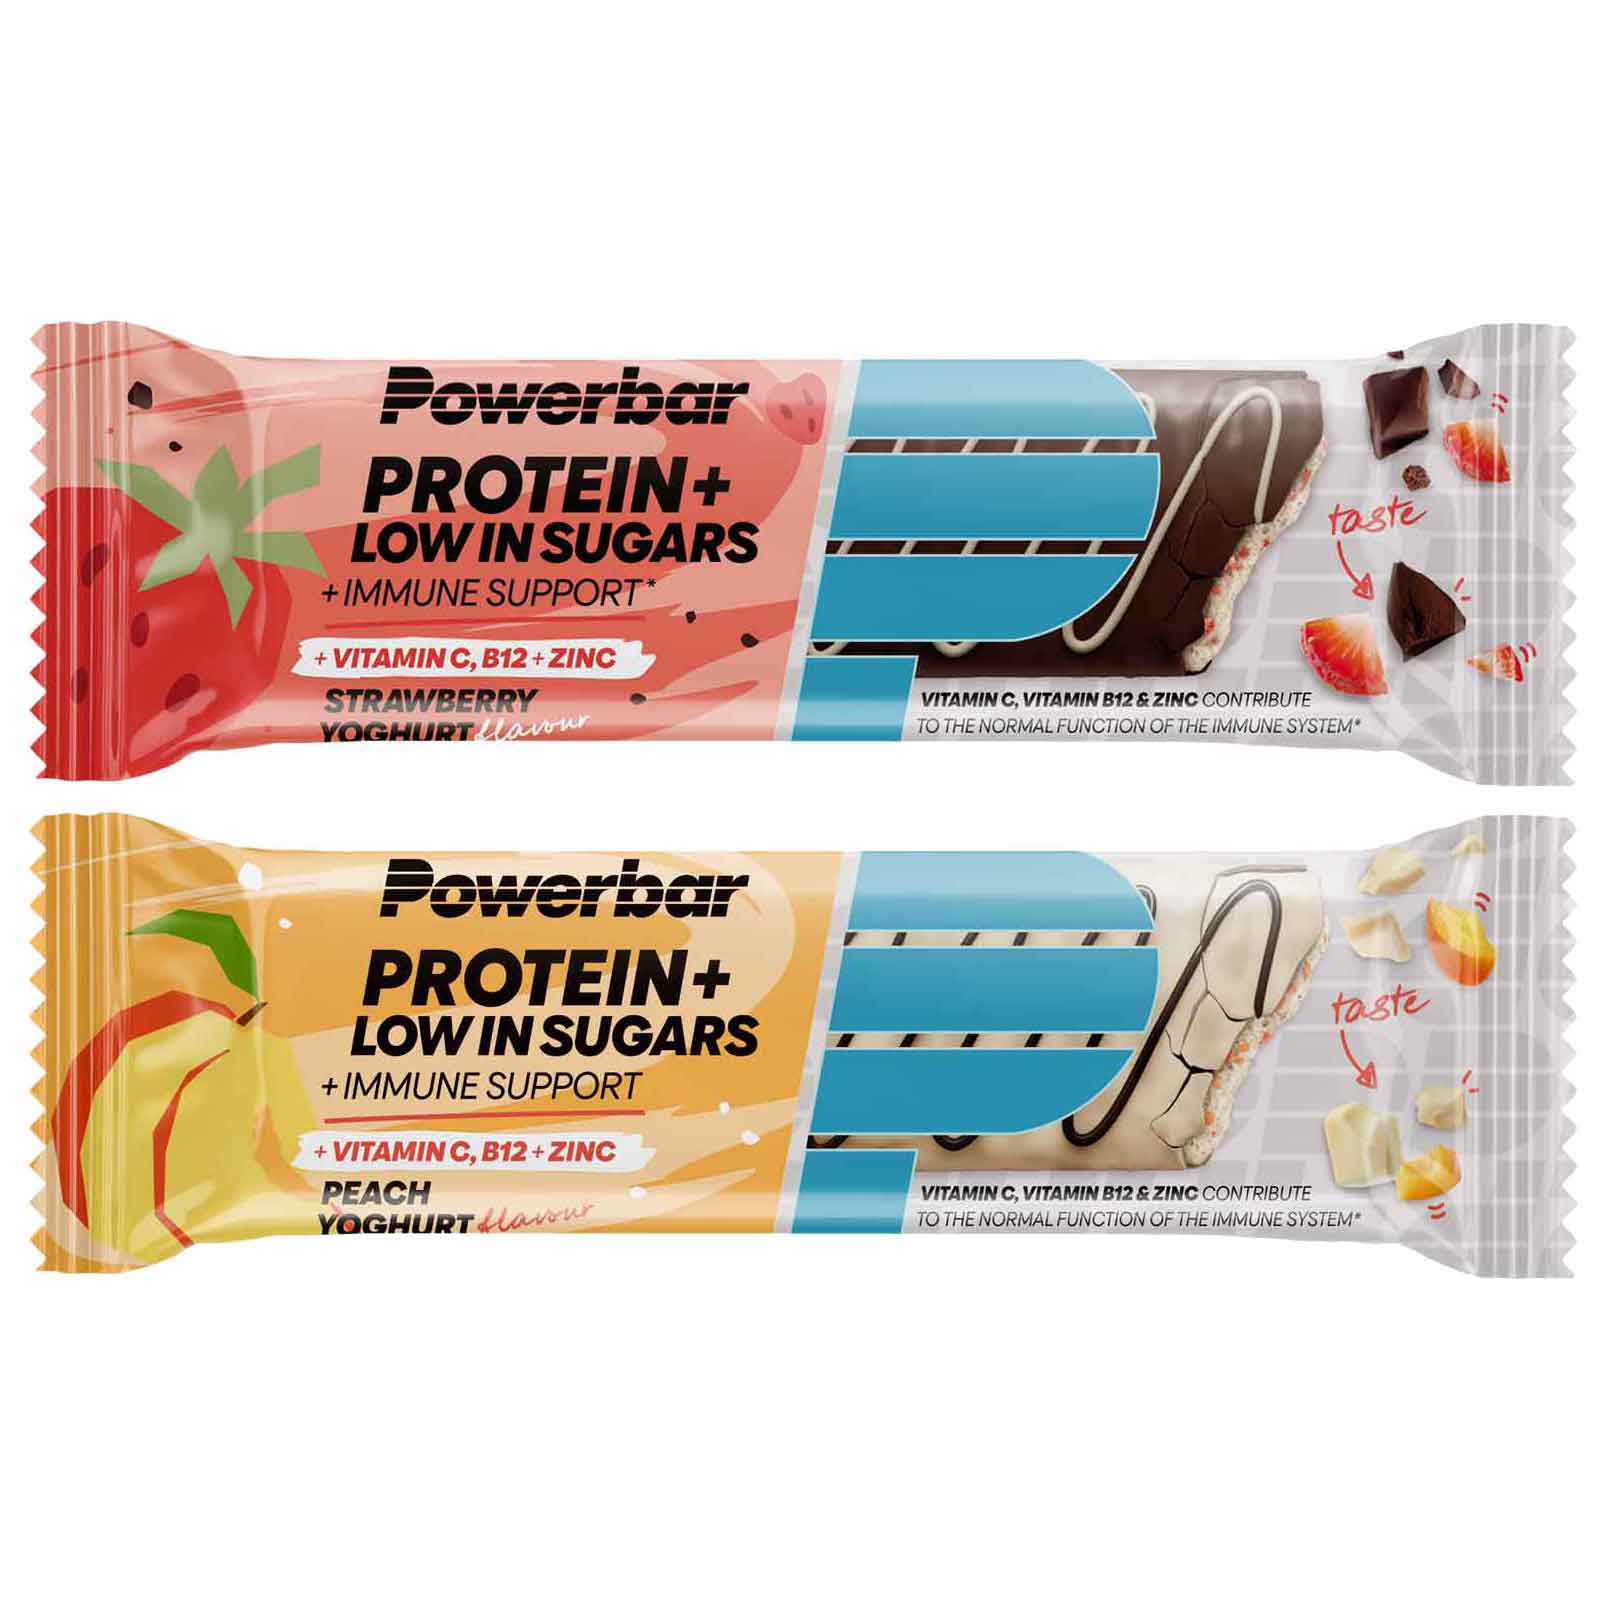 Picture of Powerbar Protein+ Low in Sugars Immune Support Bar - 35g